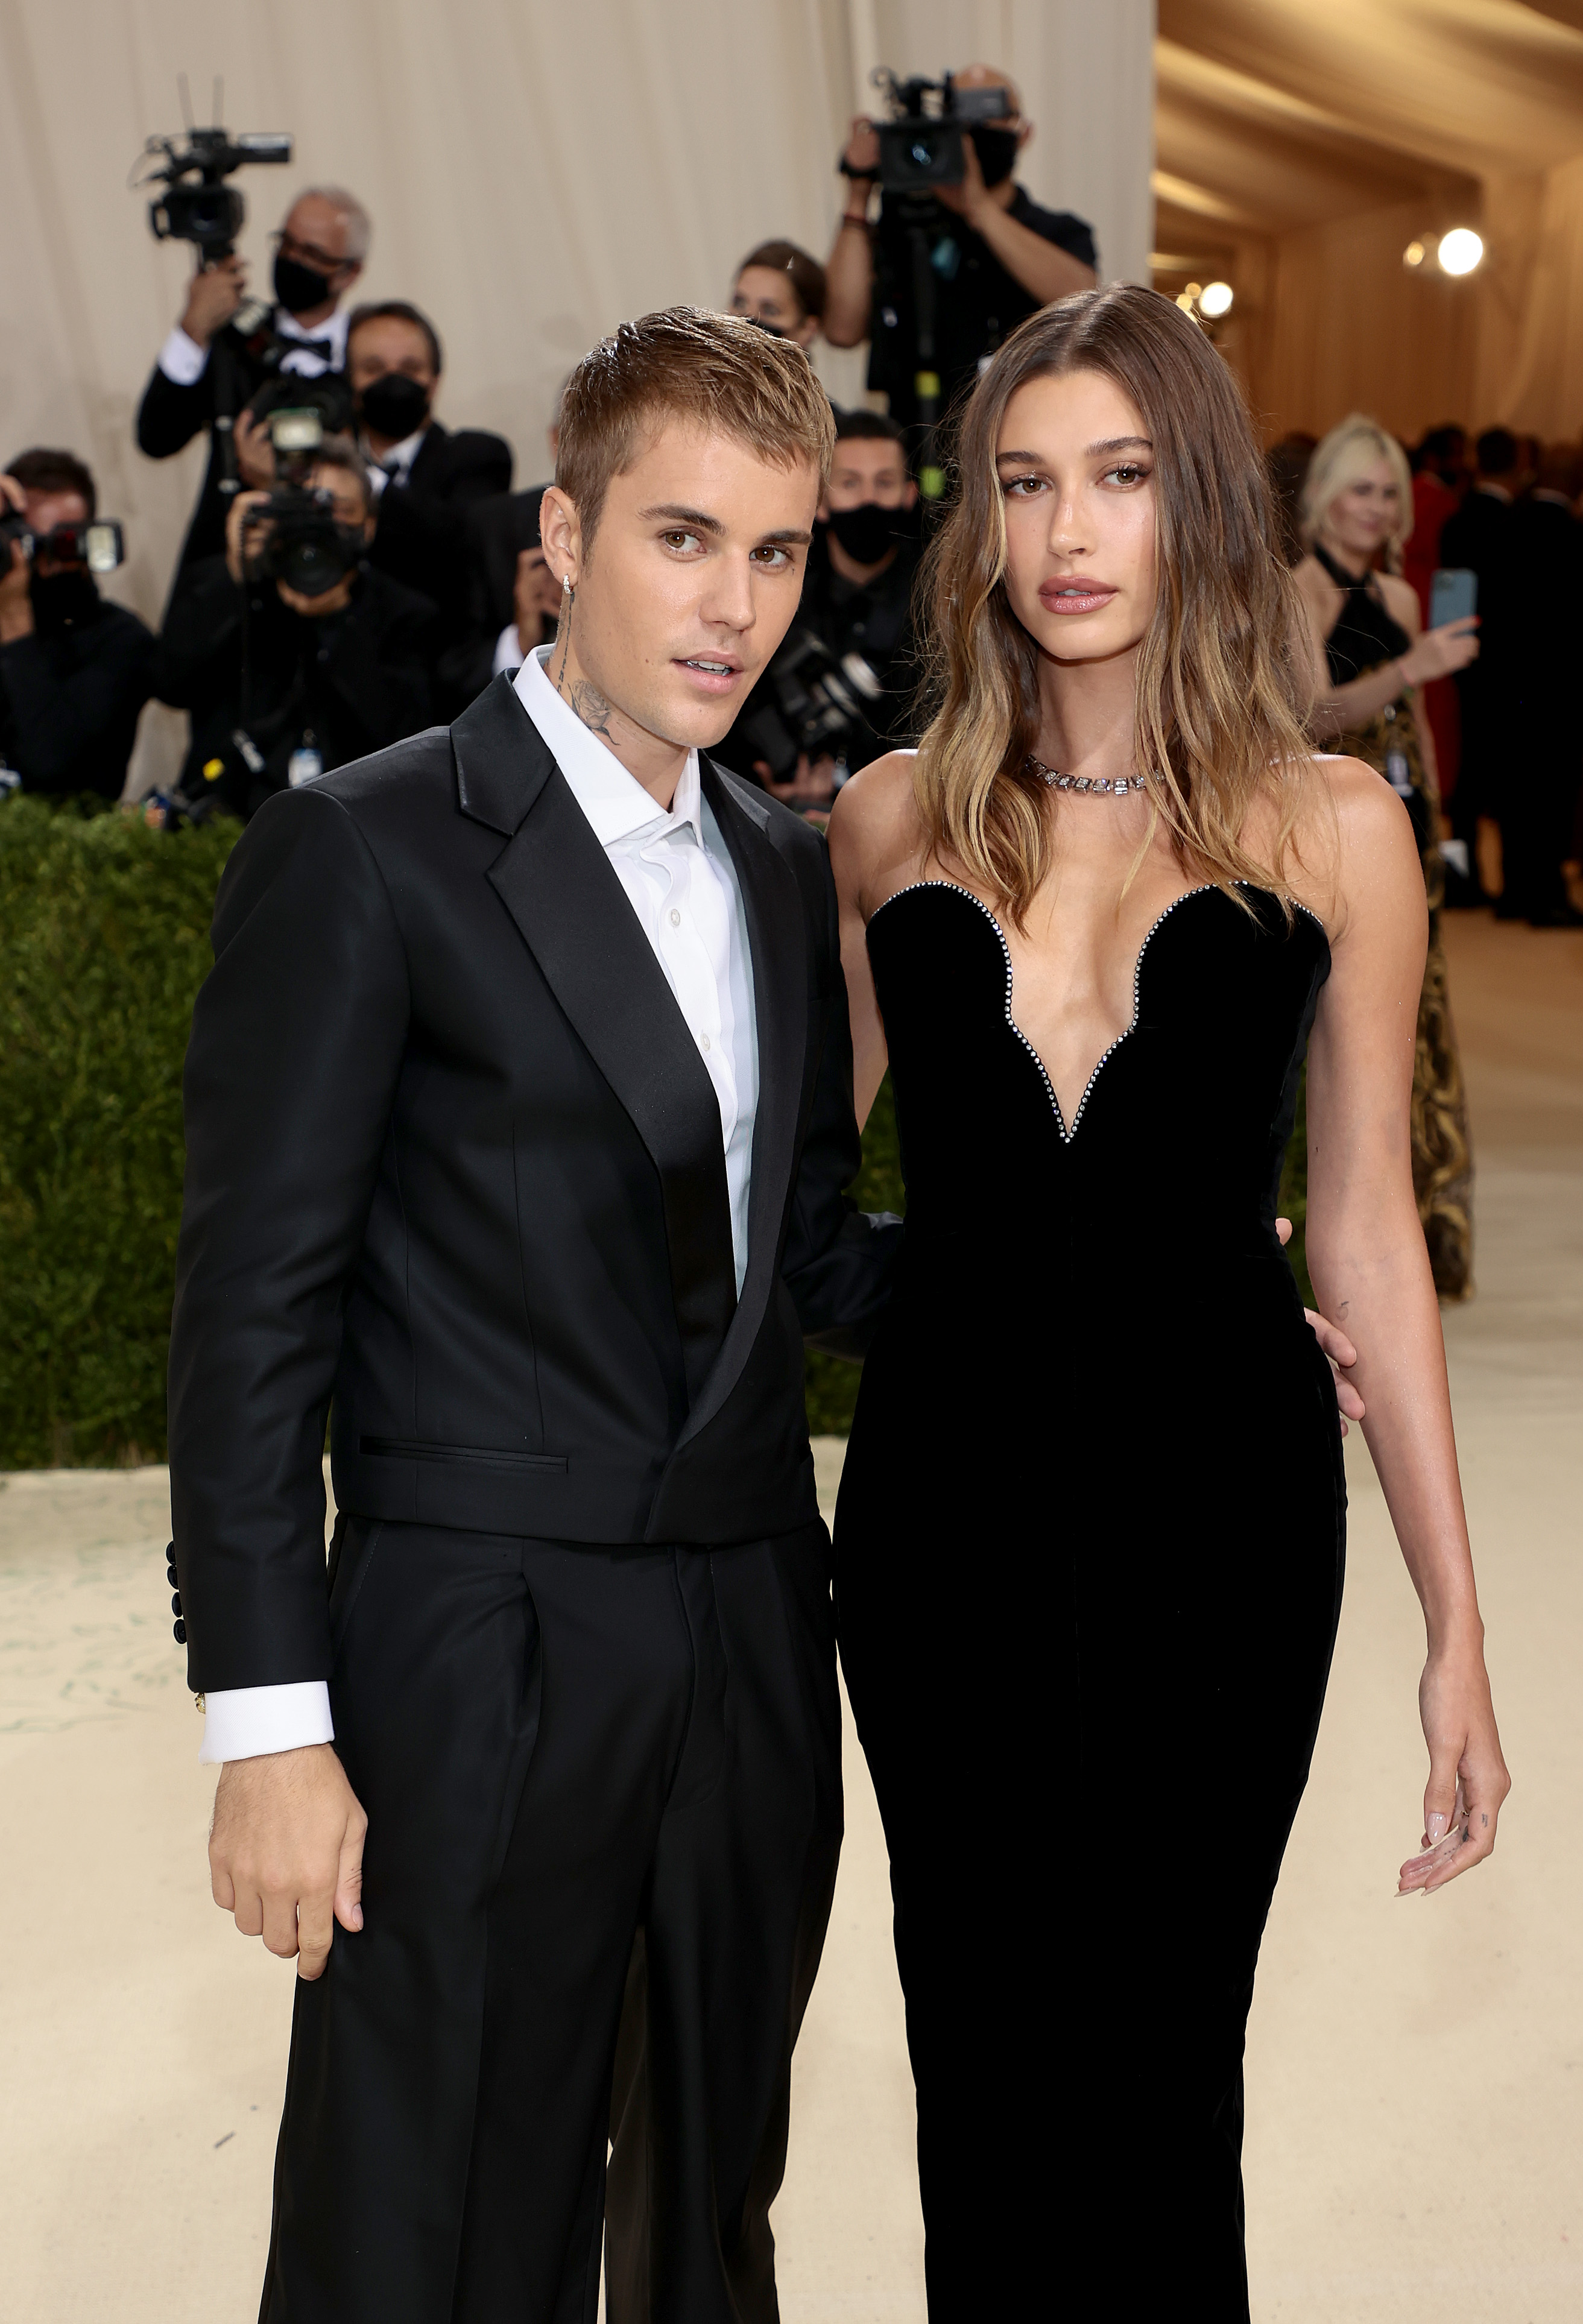 She and her husband Justin Bieber didn't attend the Met Gala on Monday